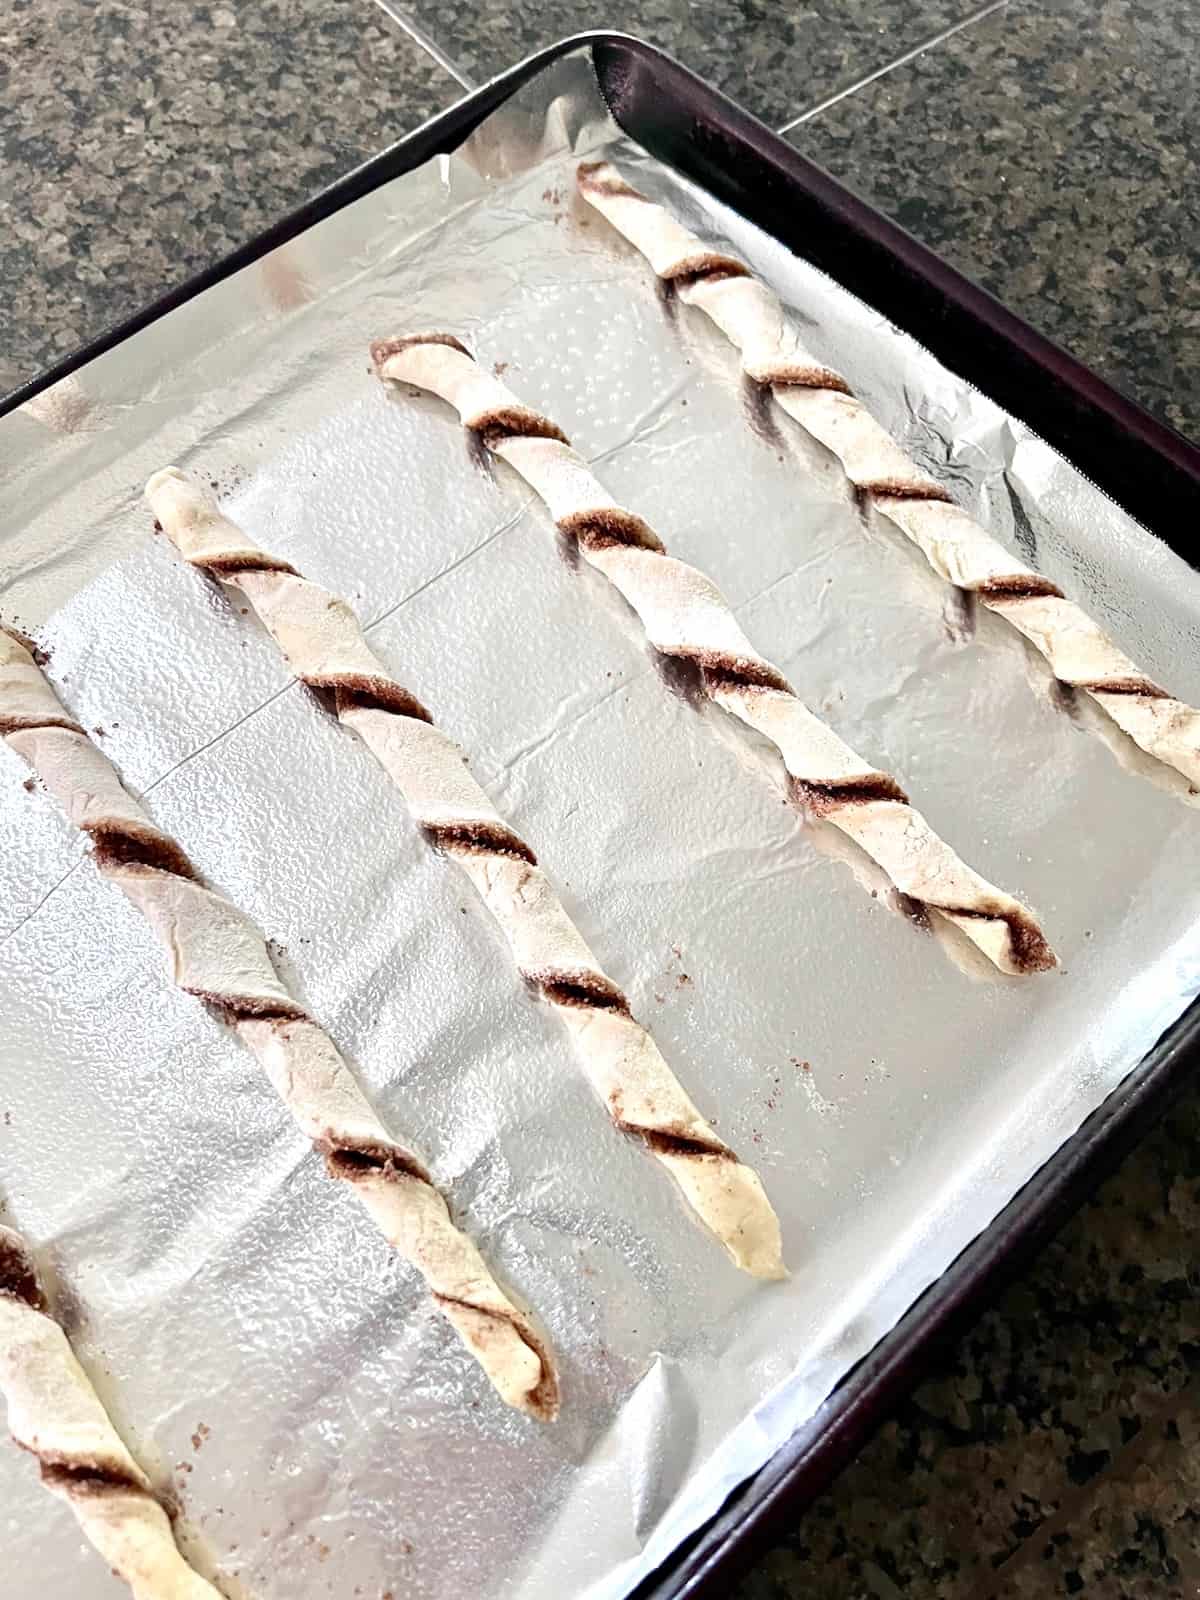 Puff Pastry Cinnamon Twists Twisted on the lined baking sheet ready to bake.